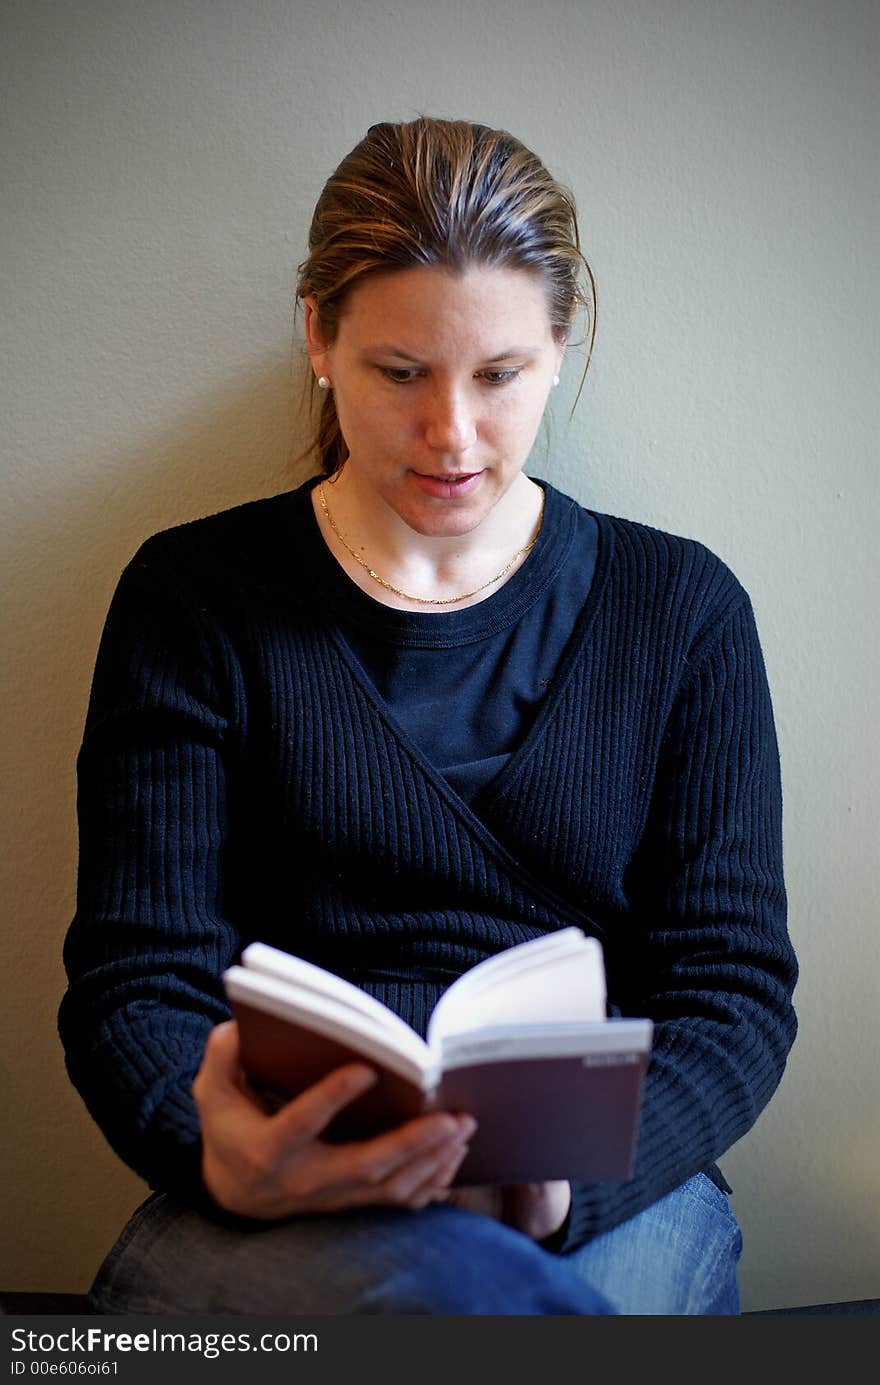 A young woman absorbed in her book with soft sideway lighting. A young woman absorbed in her book with soft sideway lighting